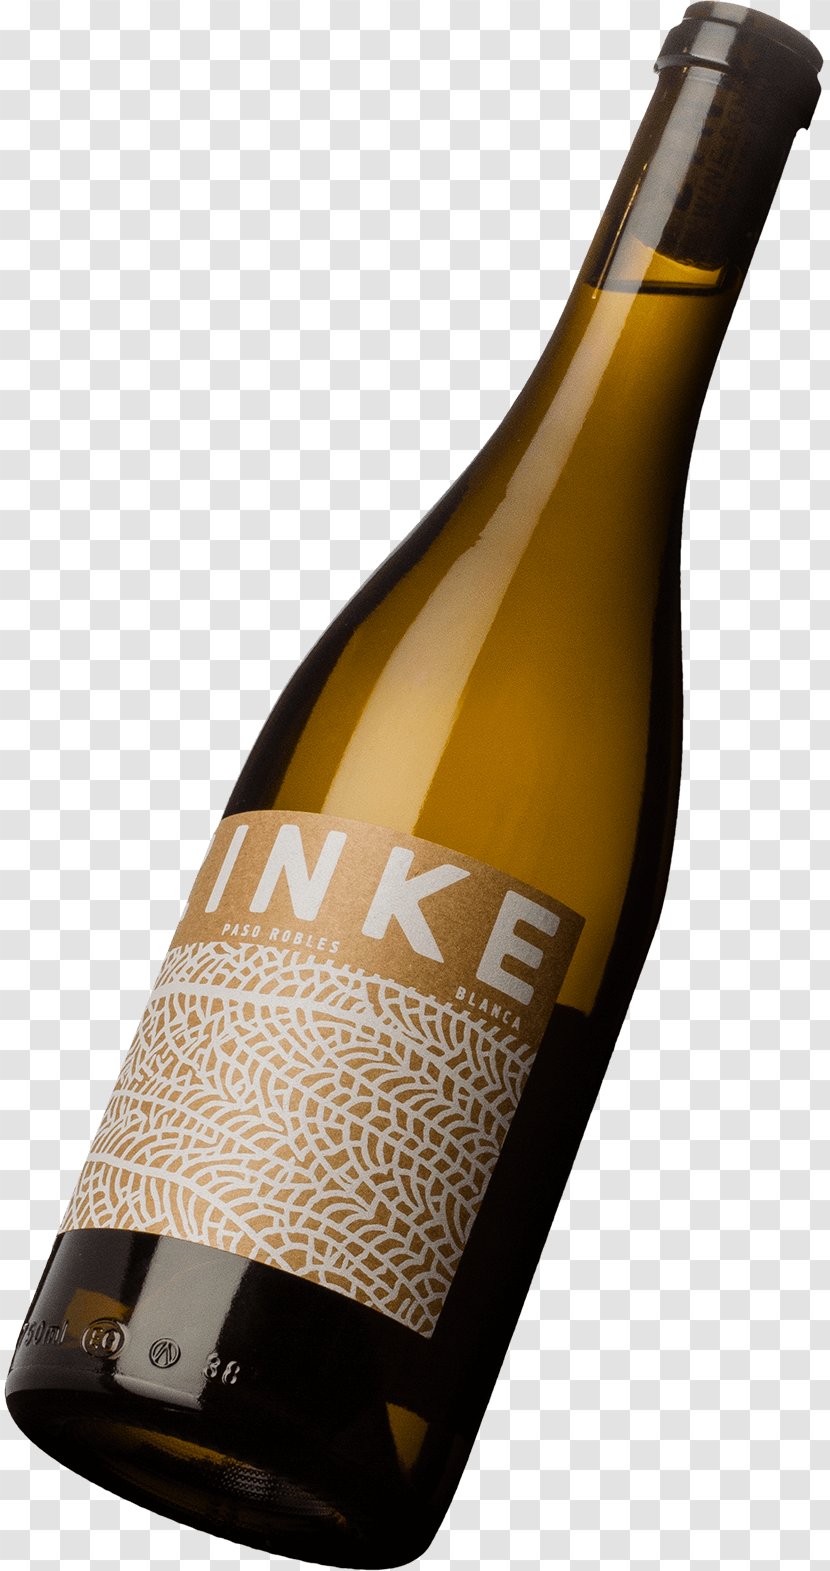 Zinke Wine Co. White Common Grape Vine Beer - Moscato Grapes Transparent PNG